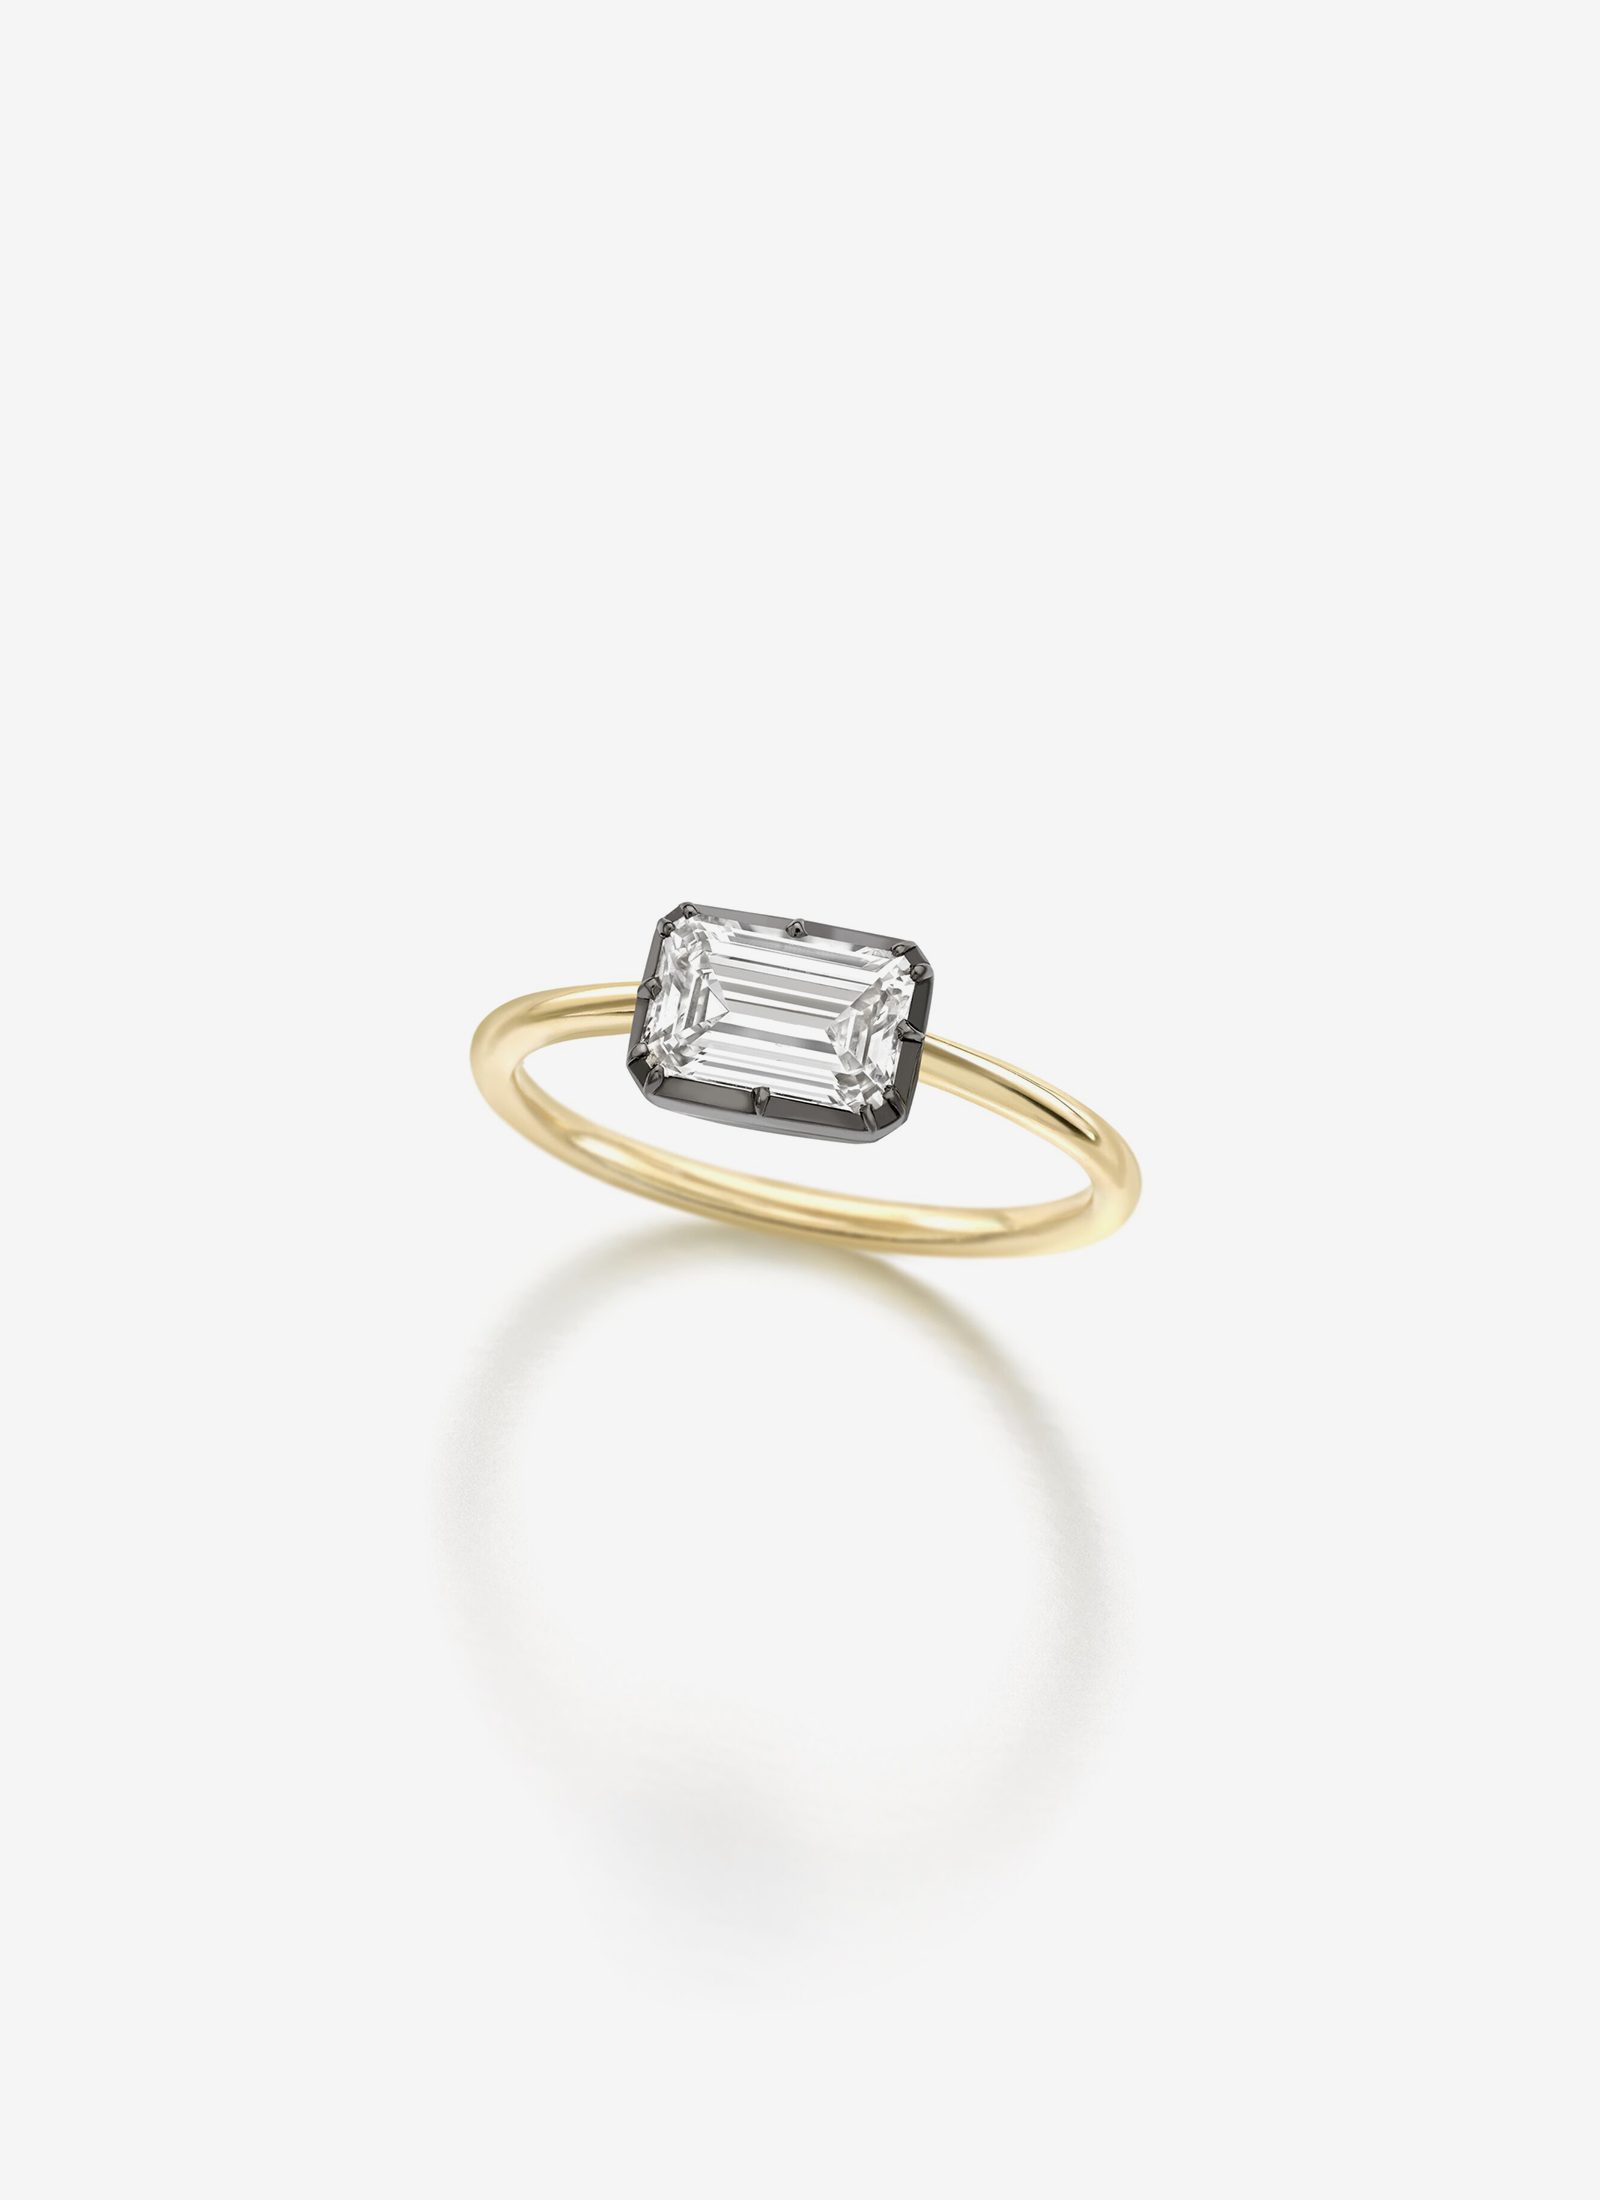 Button Back 1.00ct Emerald Cut Diamond East/West Ring - BWG